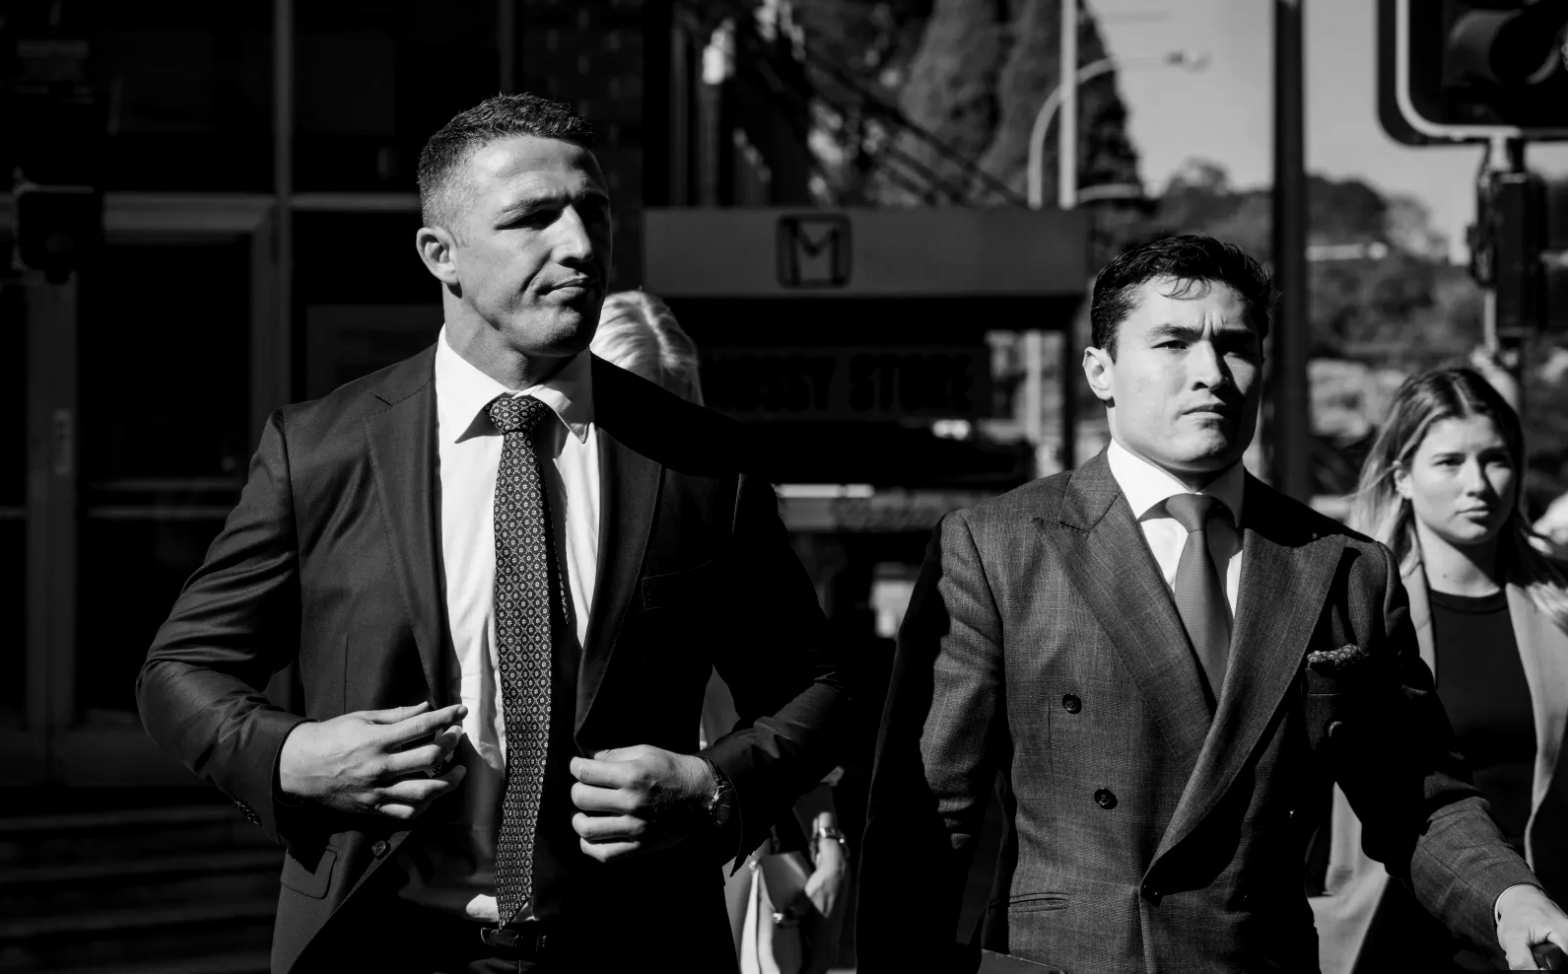 Effort to destroy Sam Burgess’ career far from over, court hears